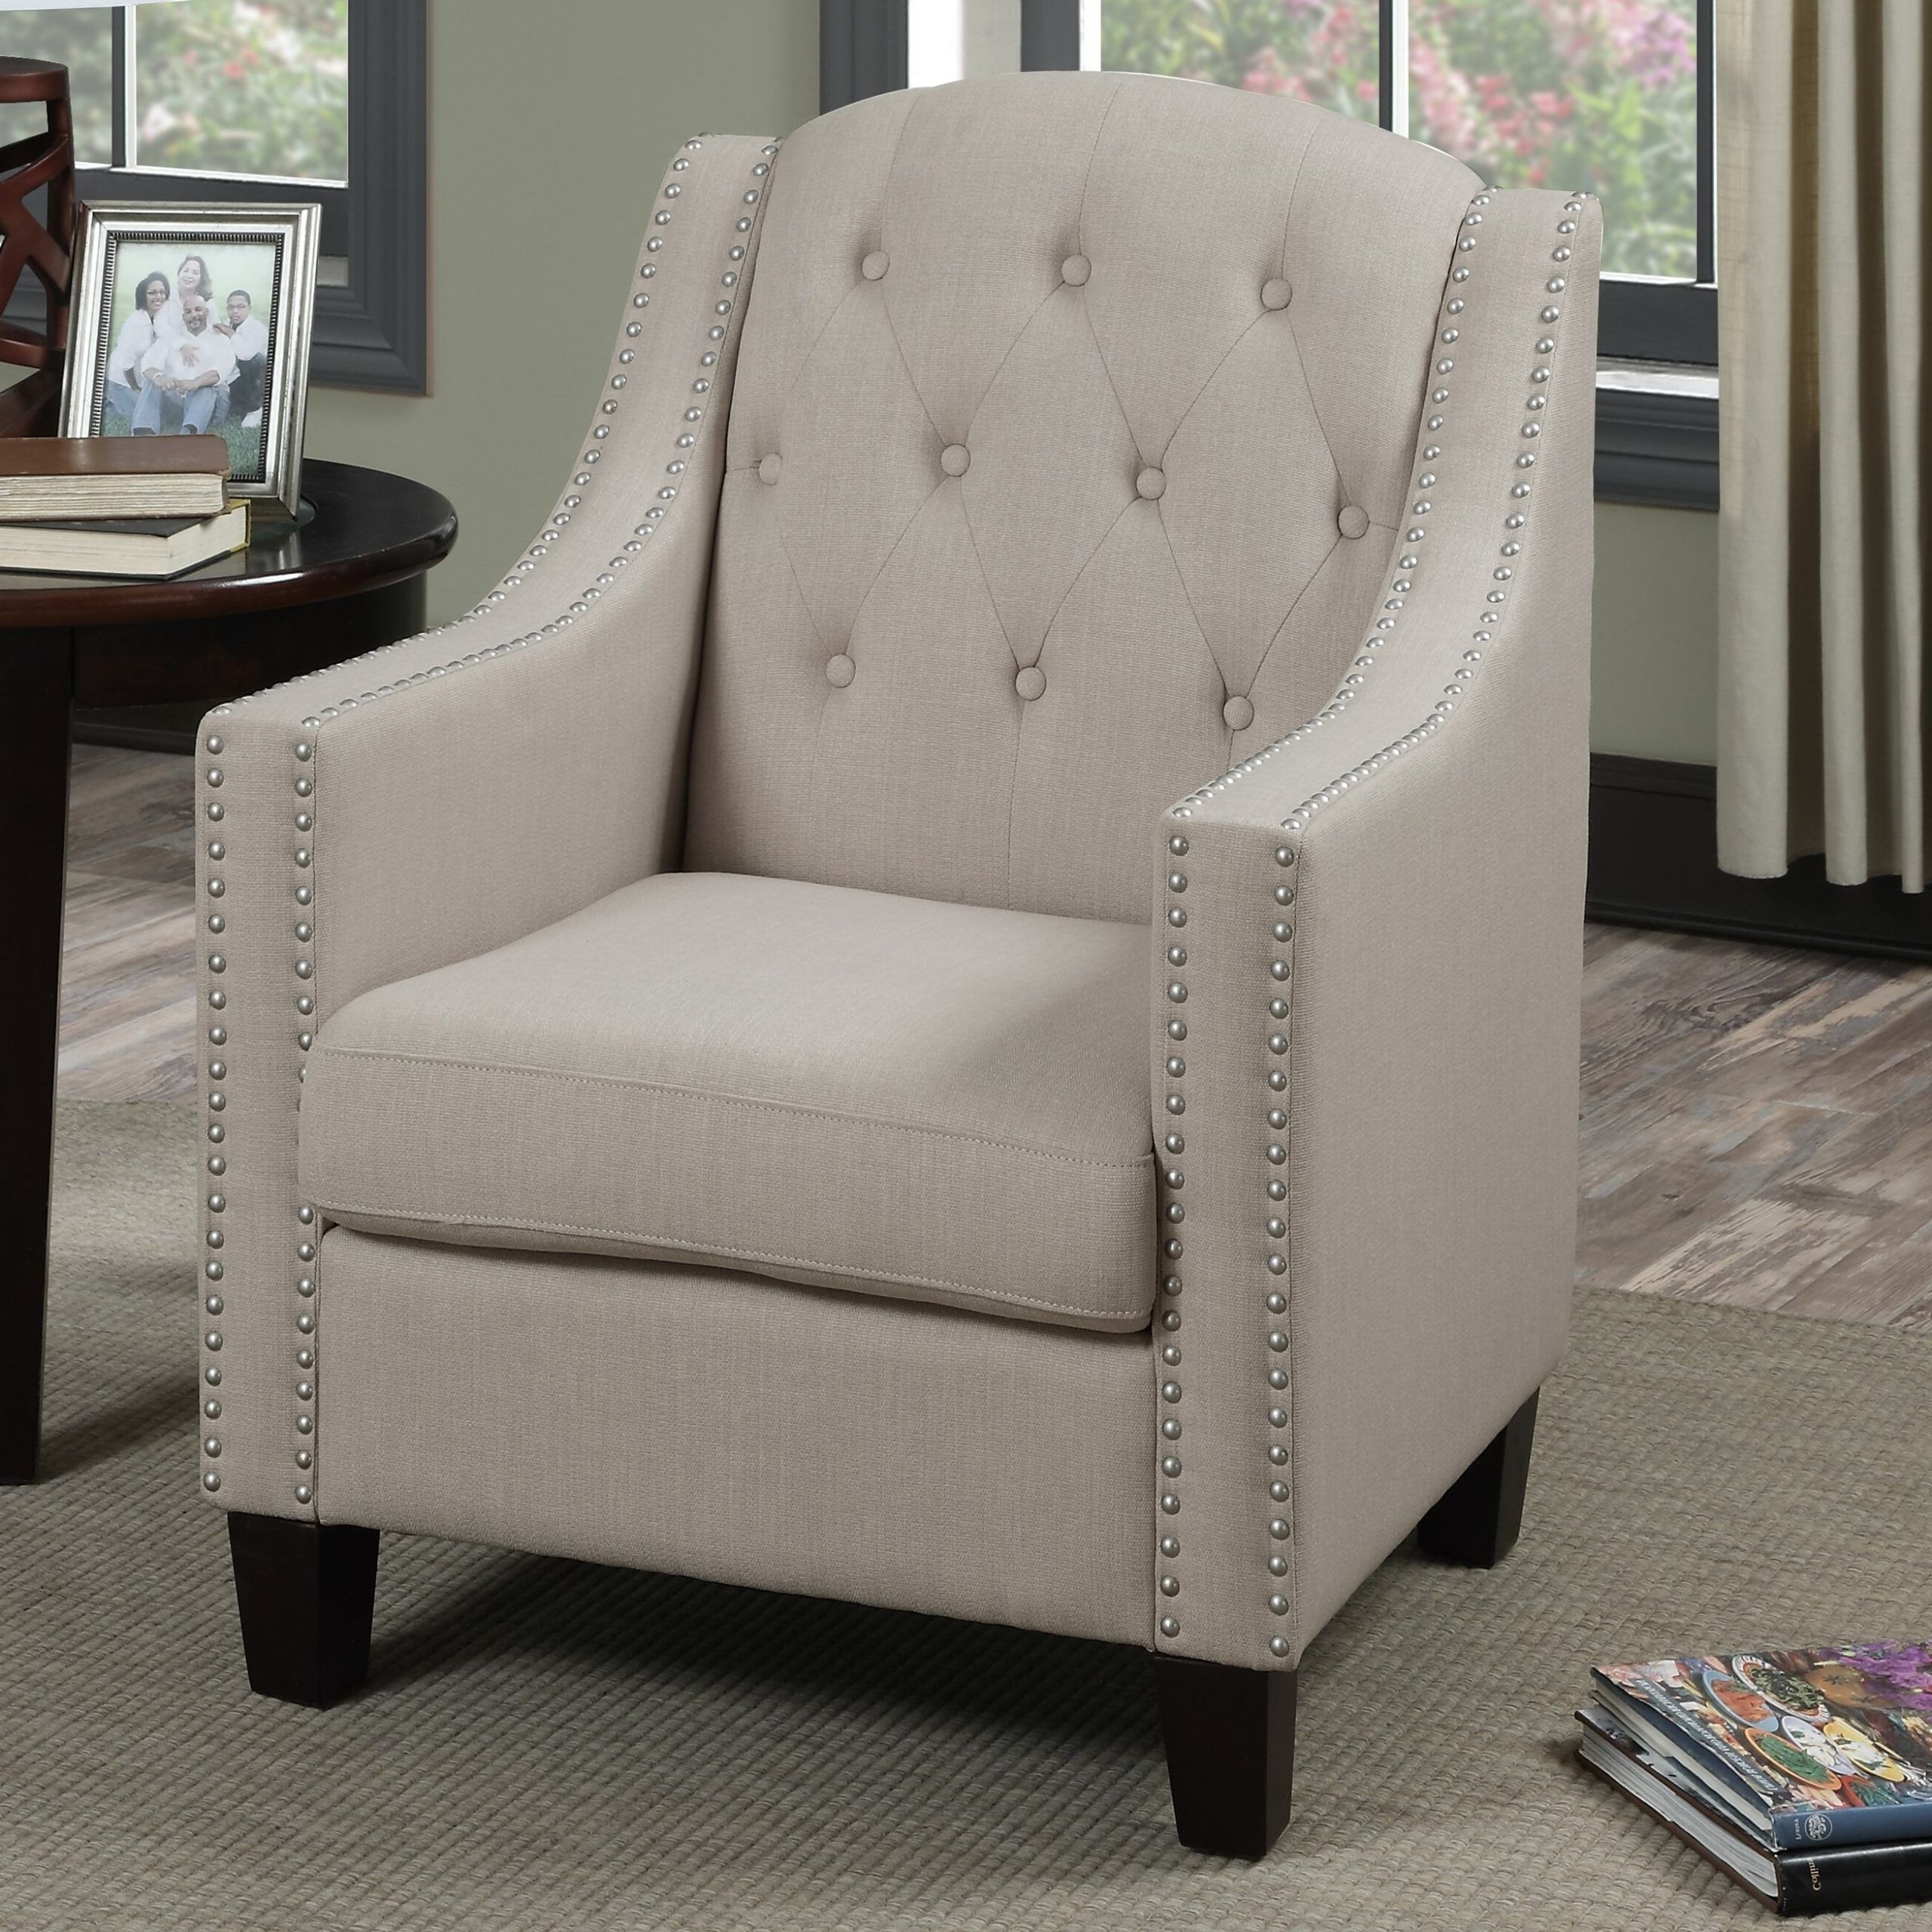 Trendy Galesville Tufted Polyester Wingback Chairs Inside Idabel Wingback Chair (View 19 of 20)